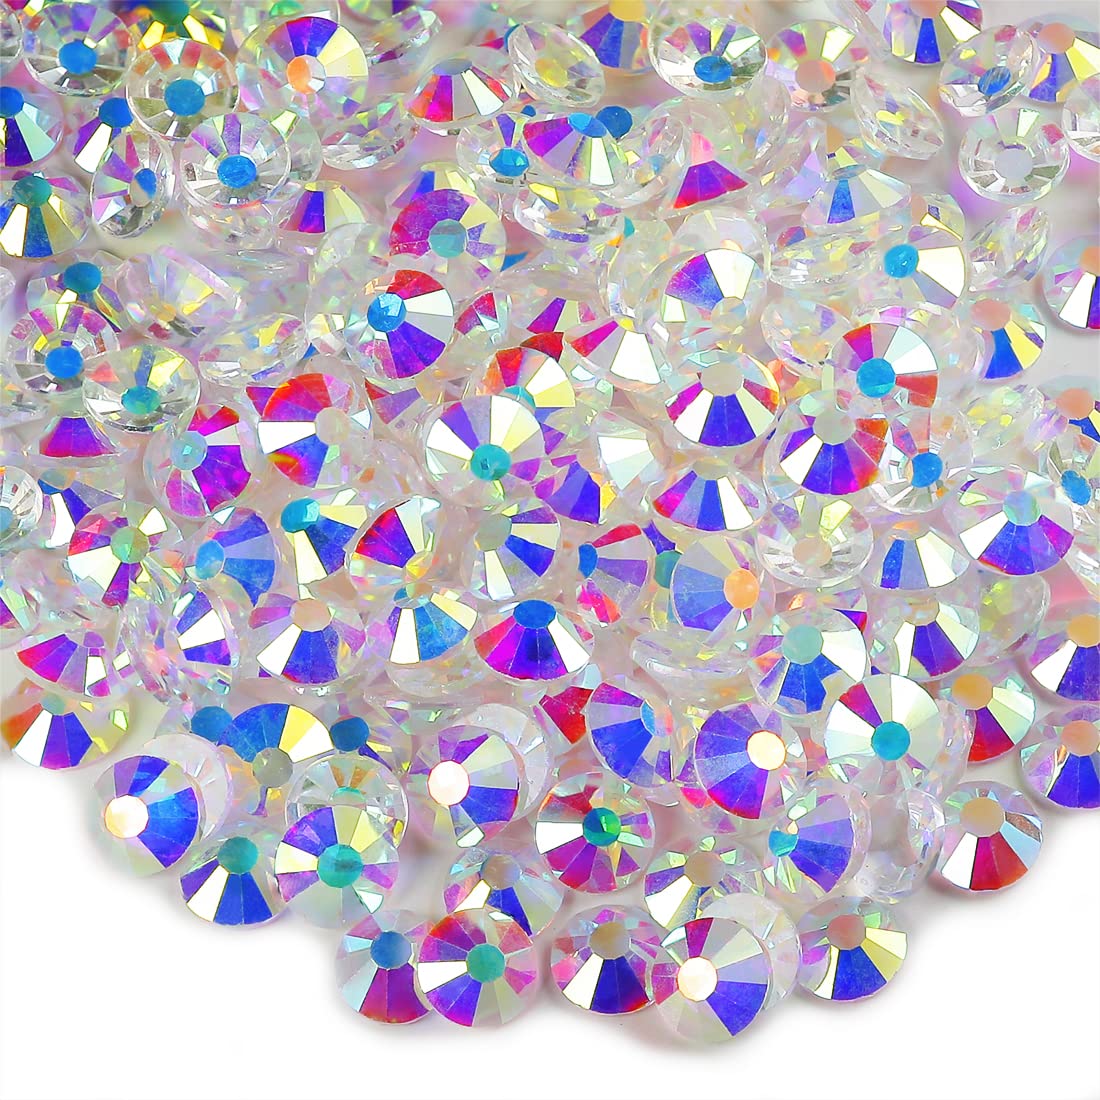 Genie Crystal 1440 PCS Clear Transparent Rhinestones SS20, 5mm Unfoiled  Flatback Glass Rhinestone for DIY Tumbler, Shoes, Wedding Dreass, Cup,  Makeup